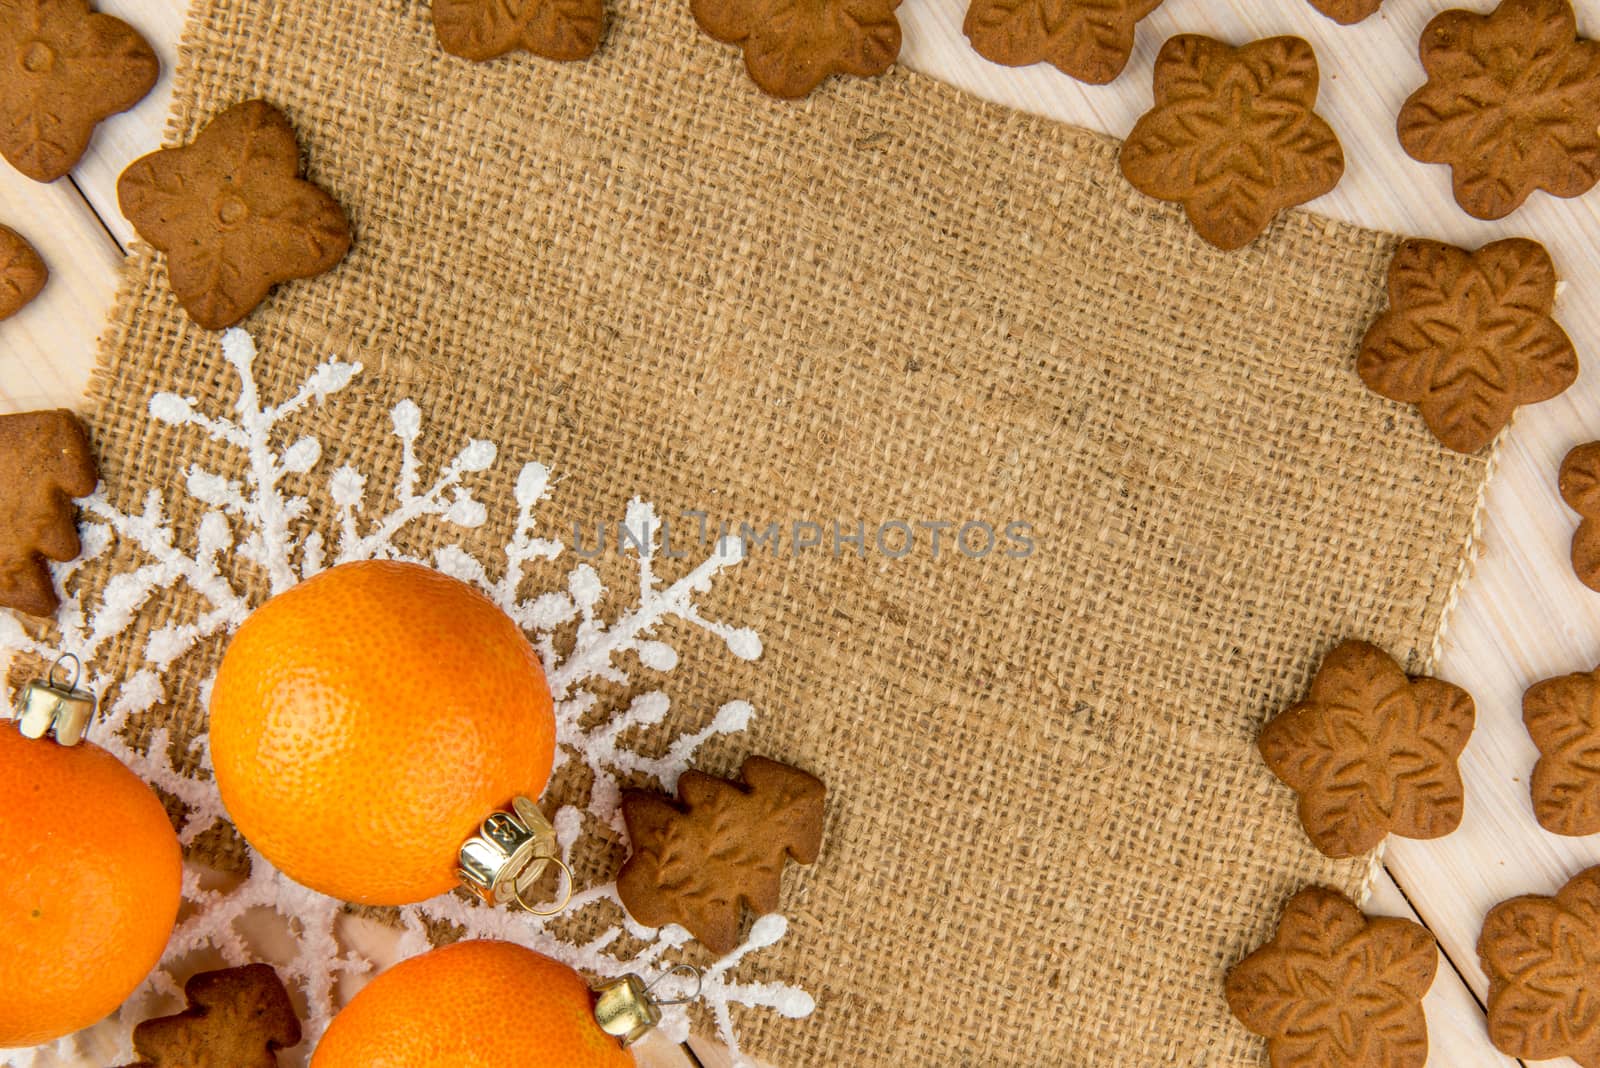 Christmas or New Year tangerines and gingerbread cookies with snowflakes framed on wooden background with brown sack background texture for text and your design.